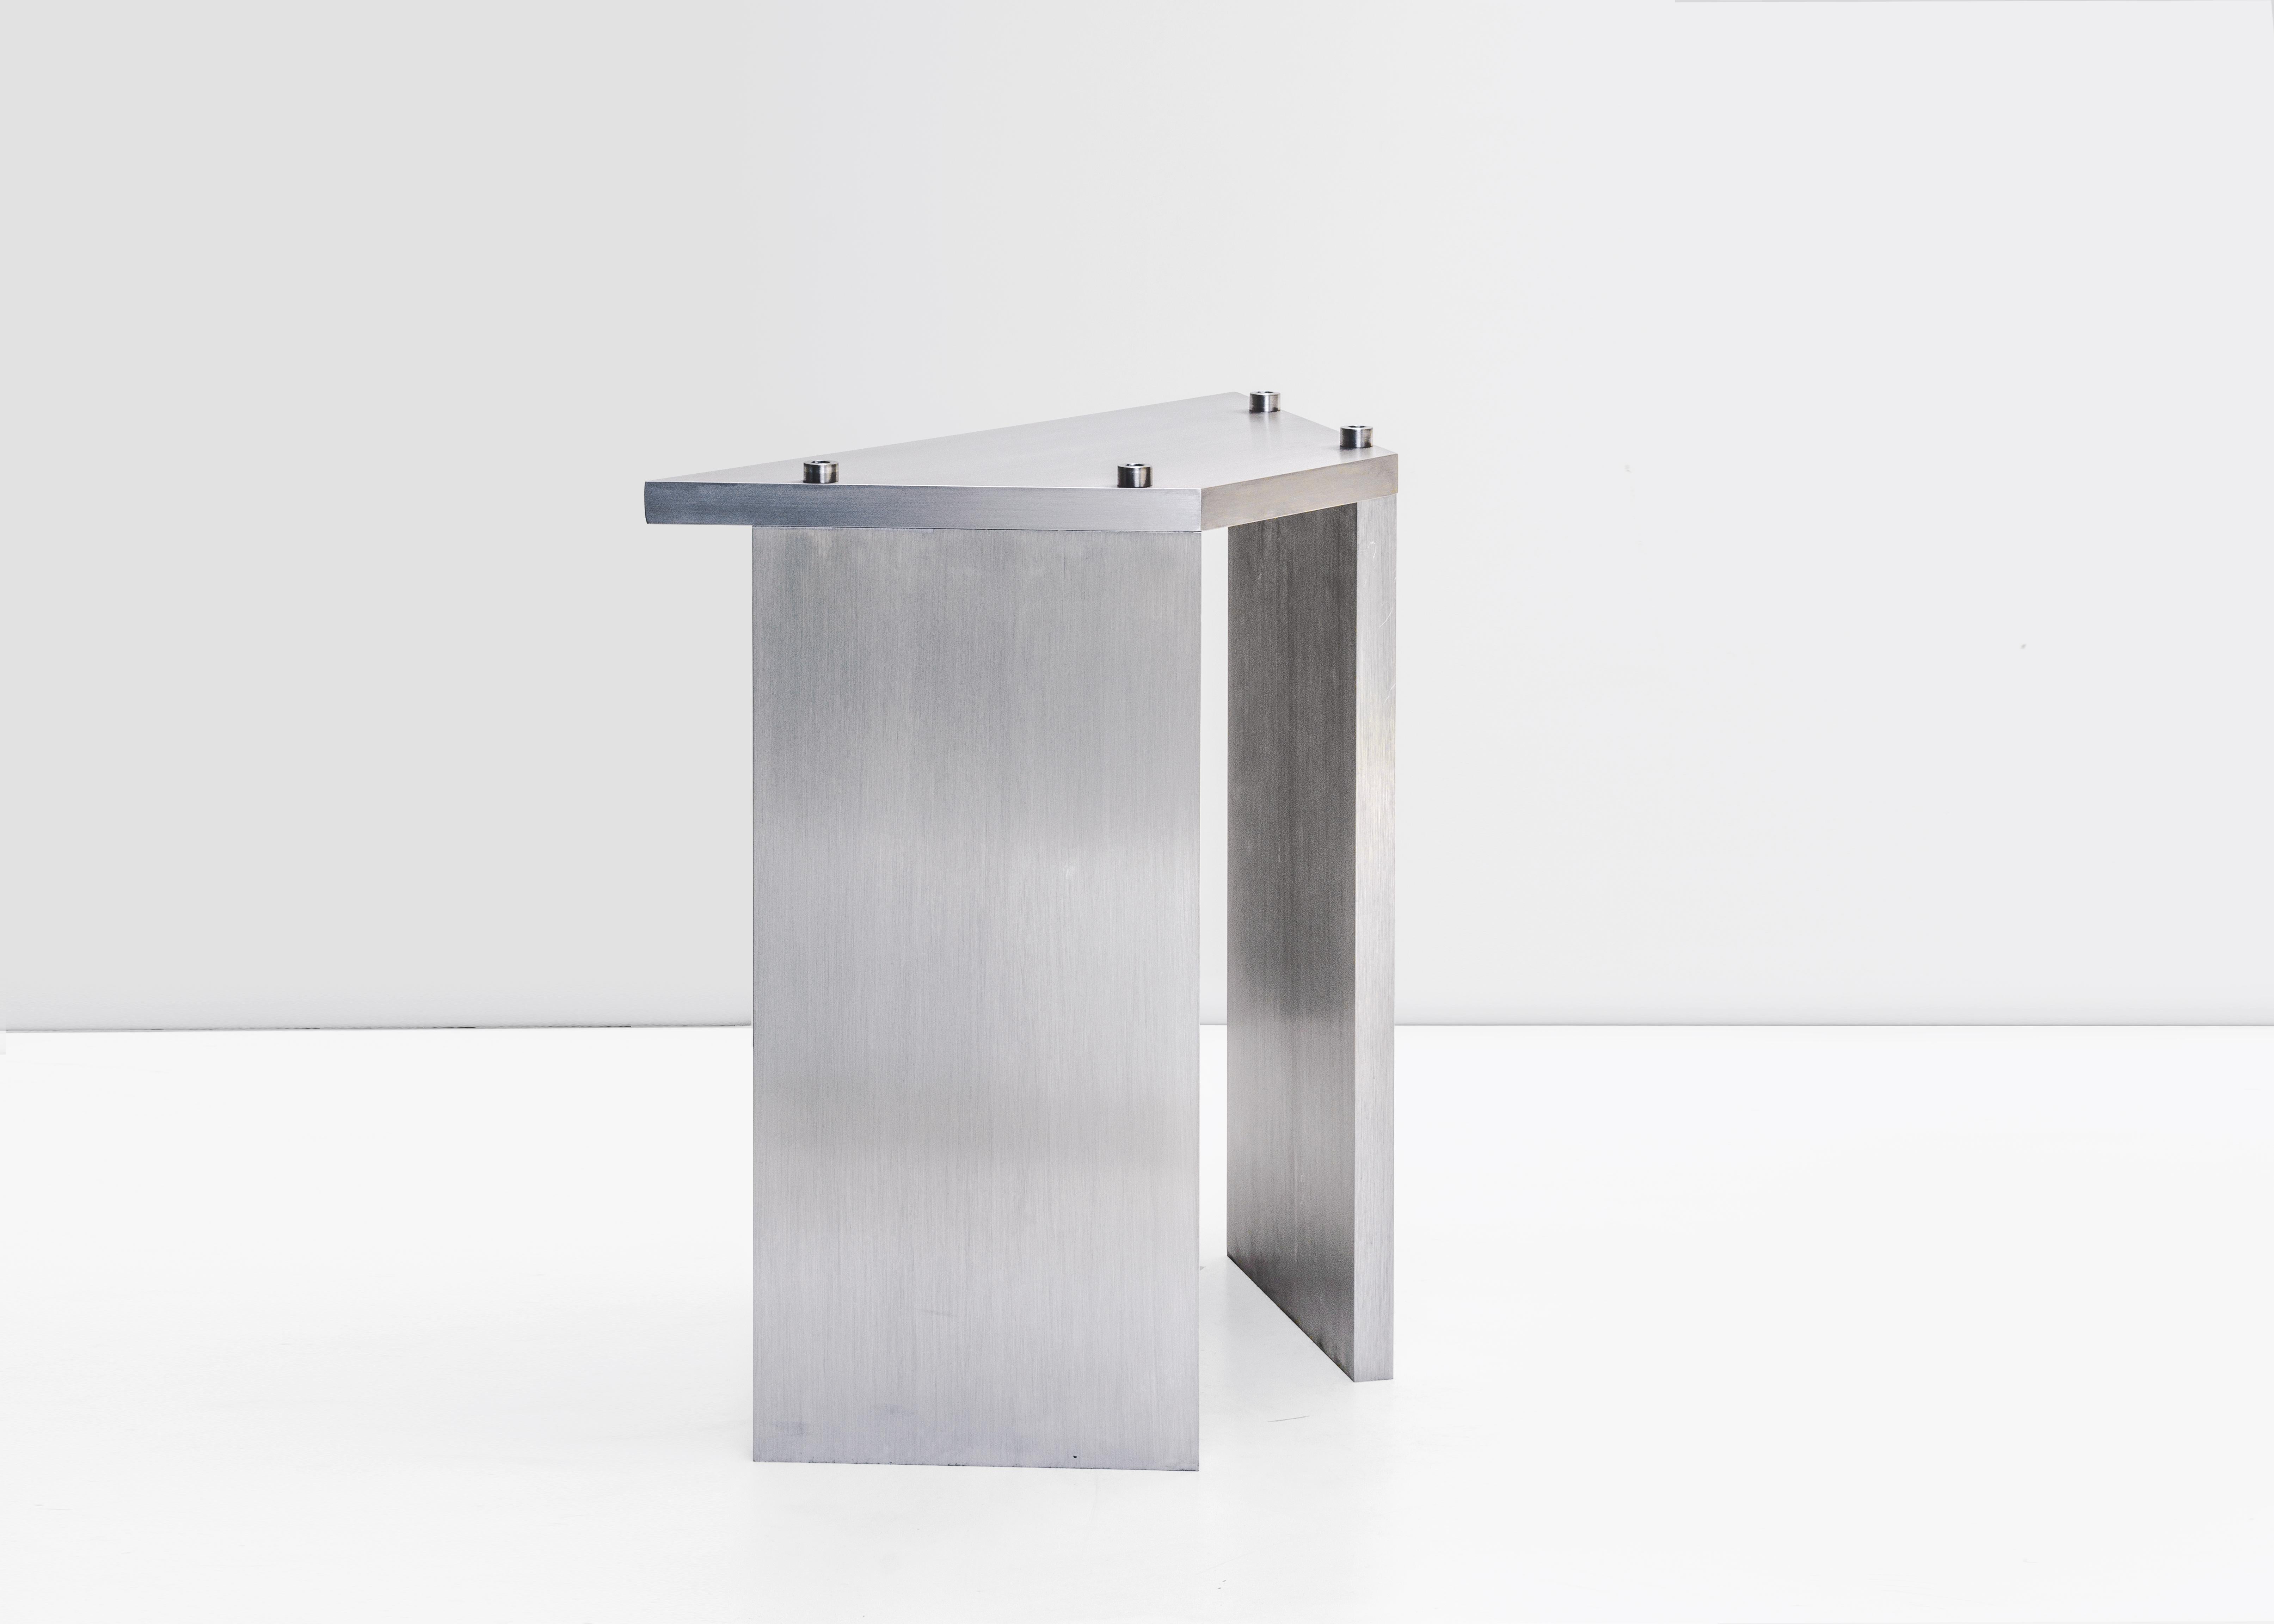 Contemporary stackable stool by Johan Viladrich.
Stackable stool.
Anodised aluminum,
Stainless steel bolts
Measures: L 43, W 20, H 45 cm.
Apprx. 15kg
Limited edition of 200 + 20AP

The table is composed of two brushed aluminium plates